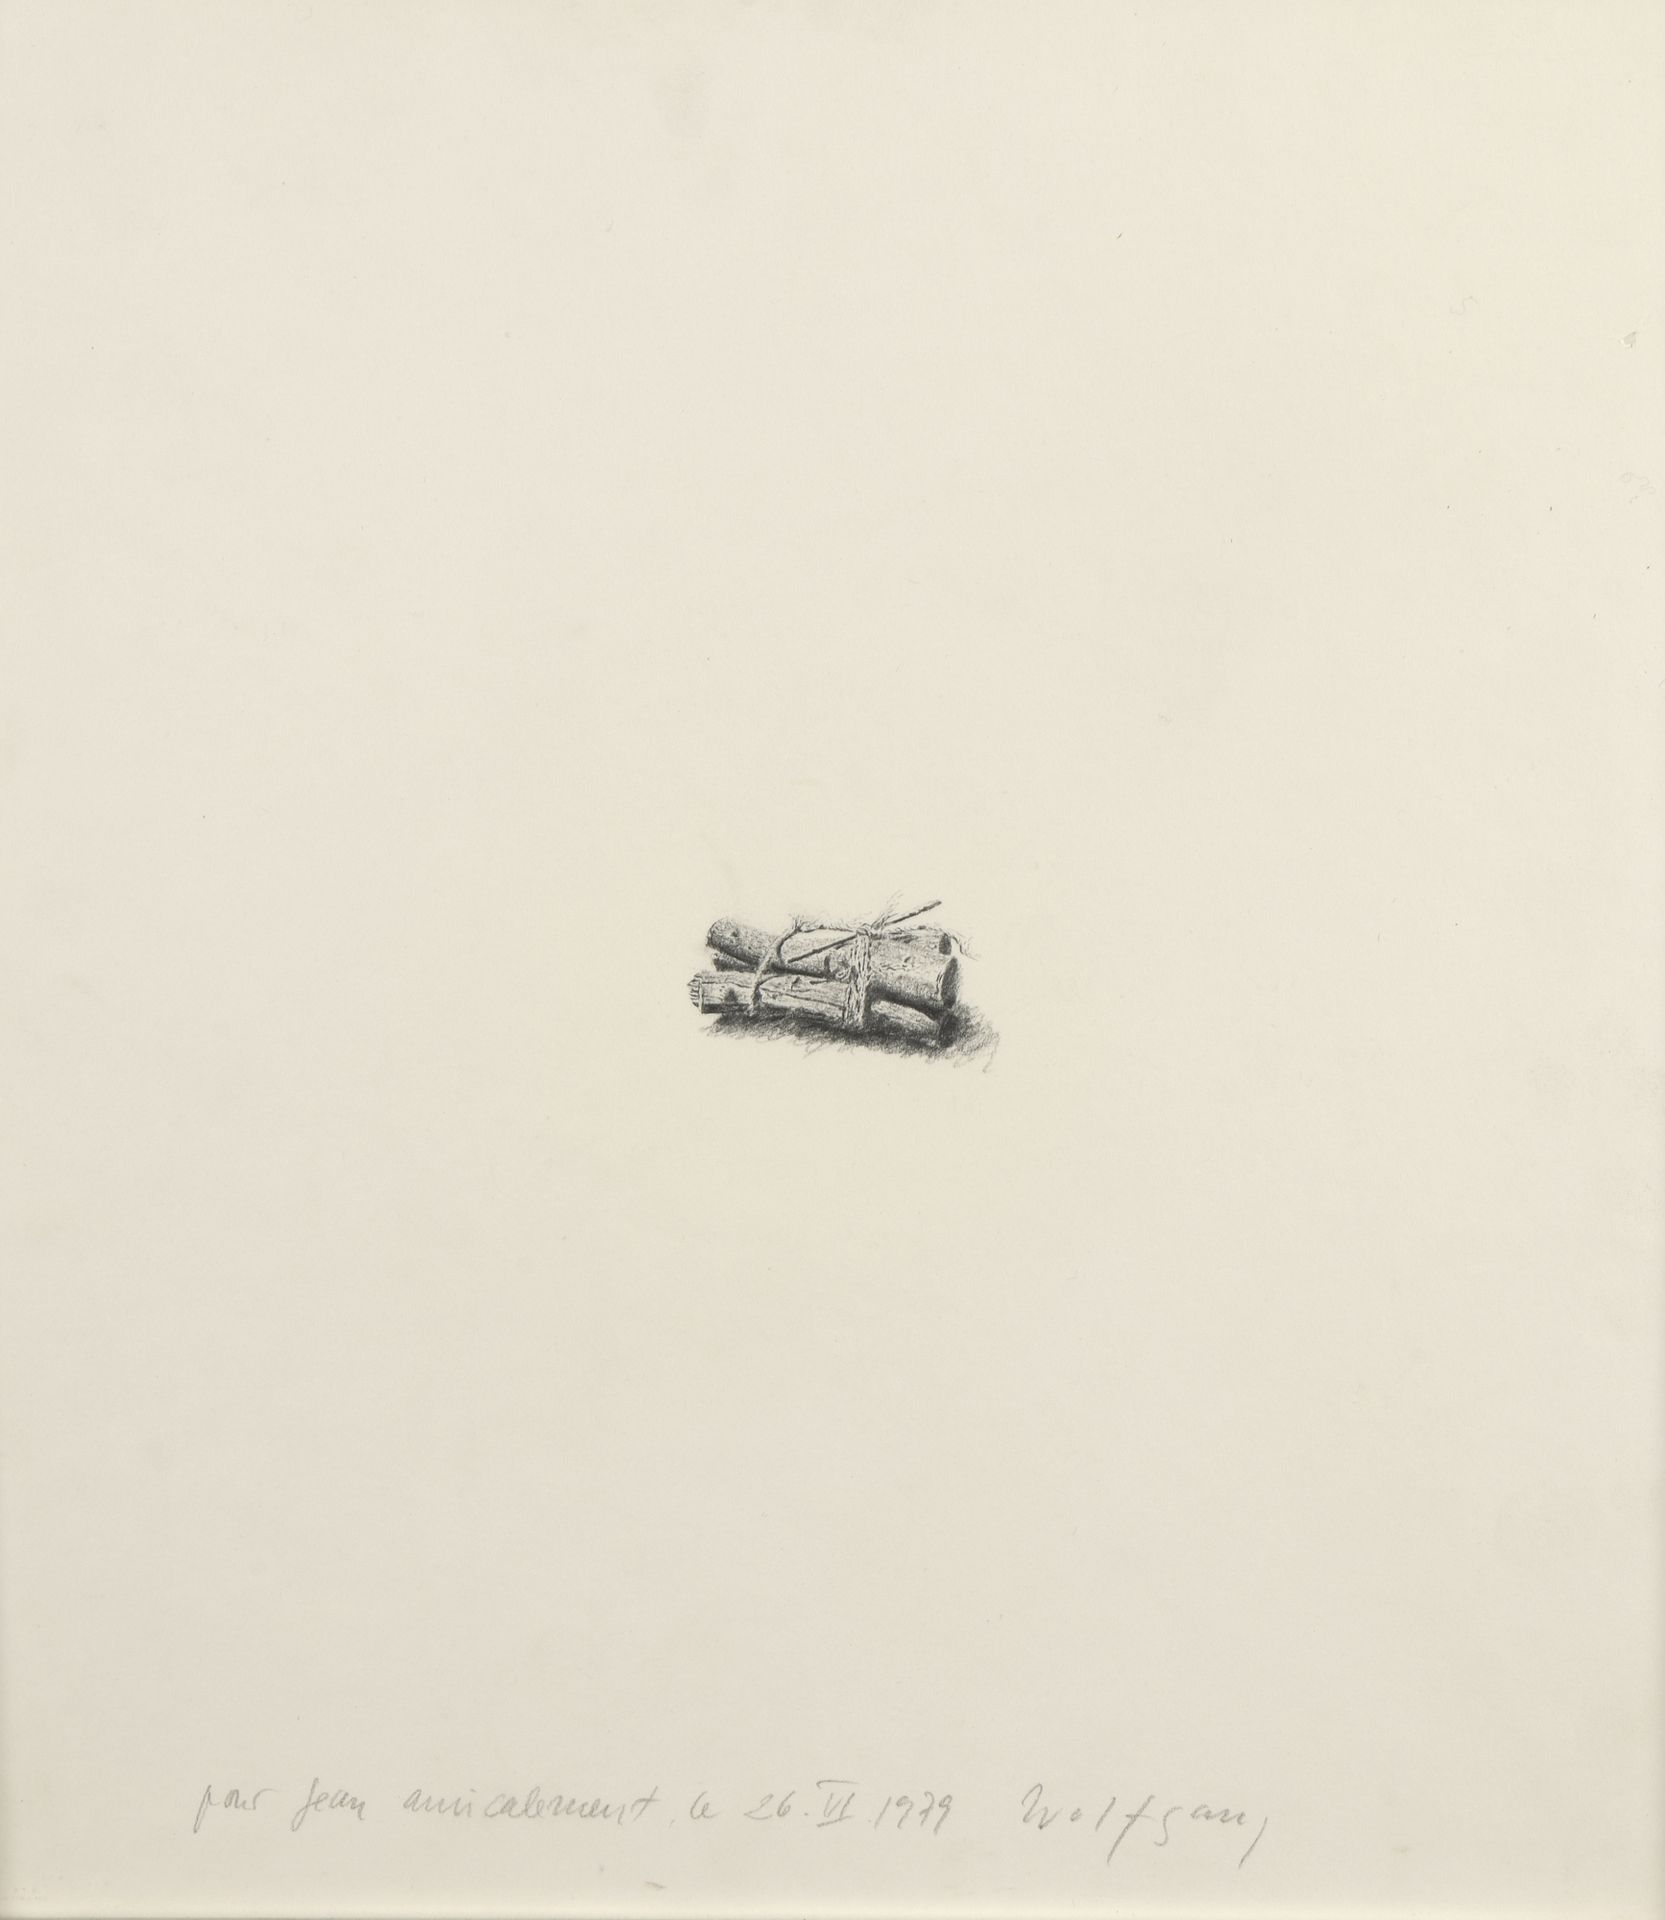 Null Wolfgang GAFGEN (born 1936)

Untitled, 1979

Pencil drawing on paper, signe&hellip;